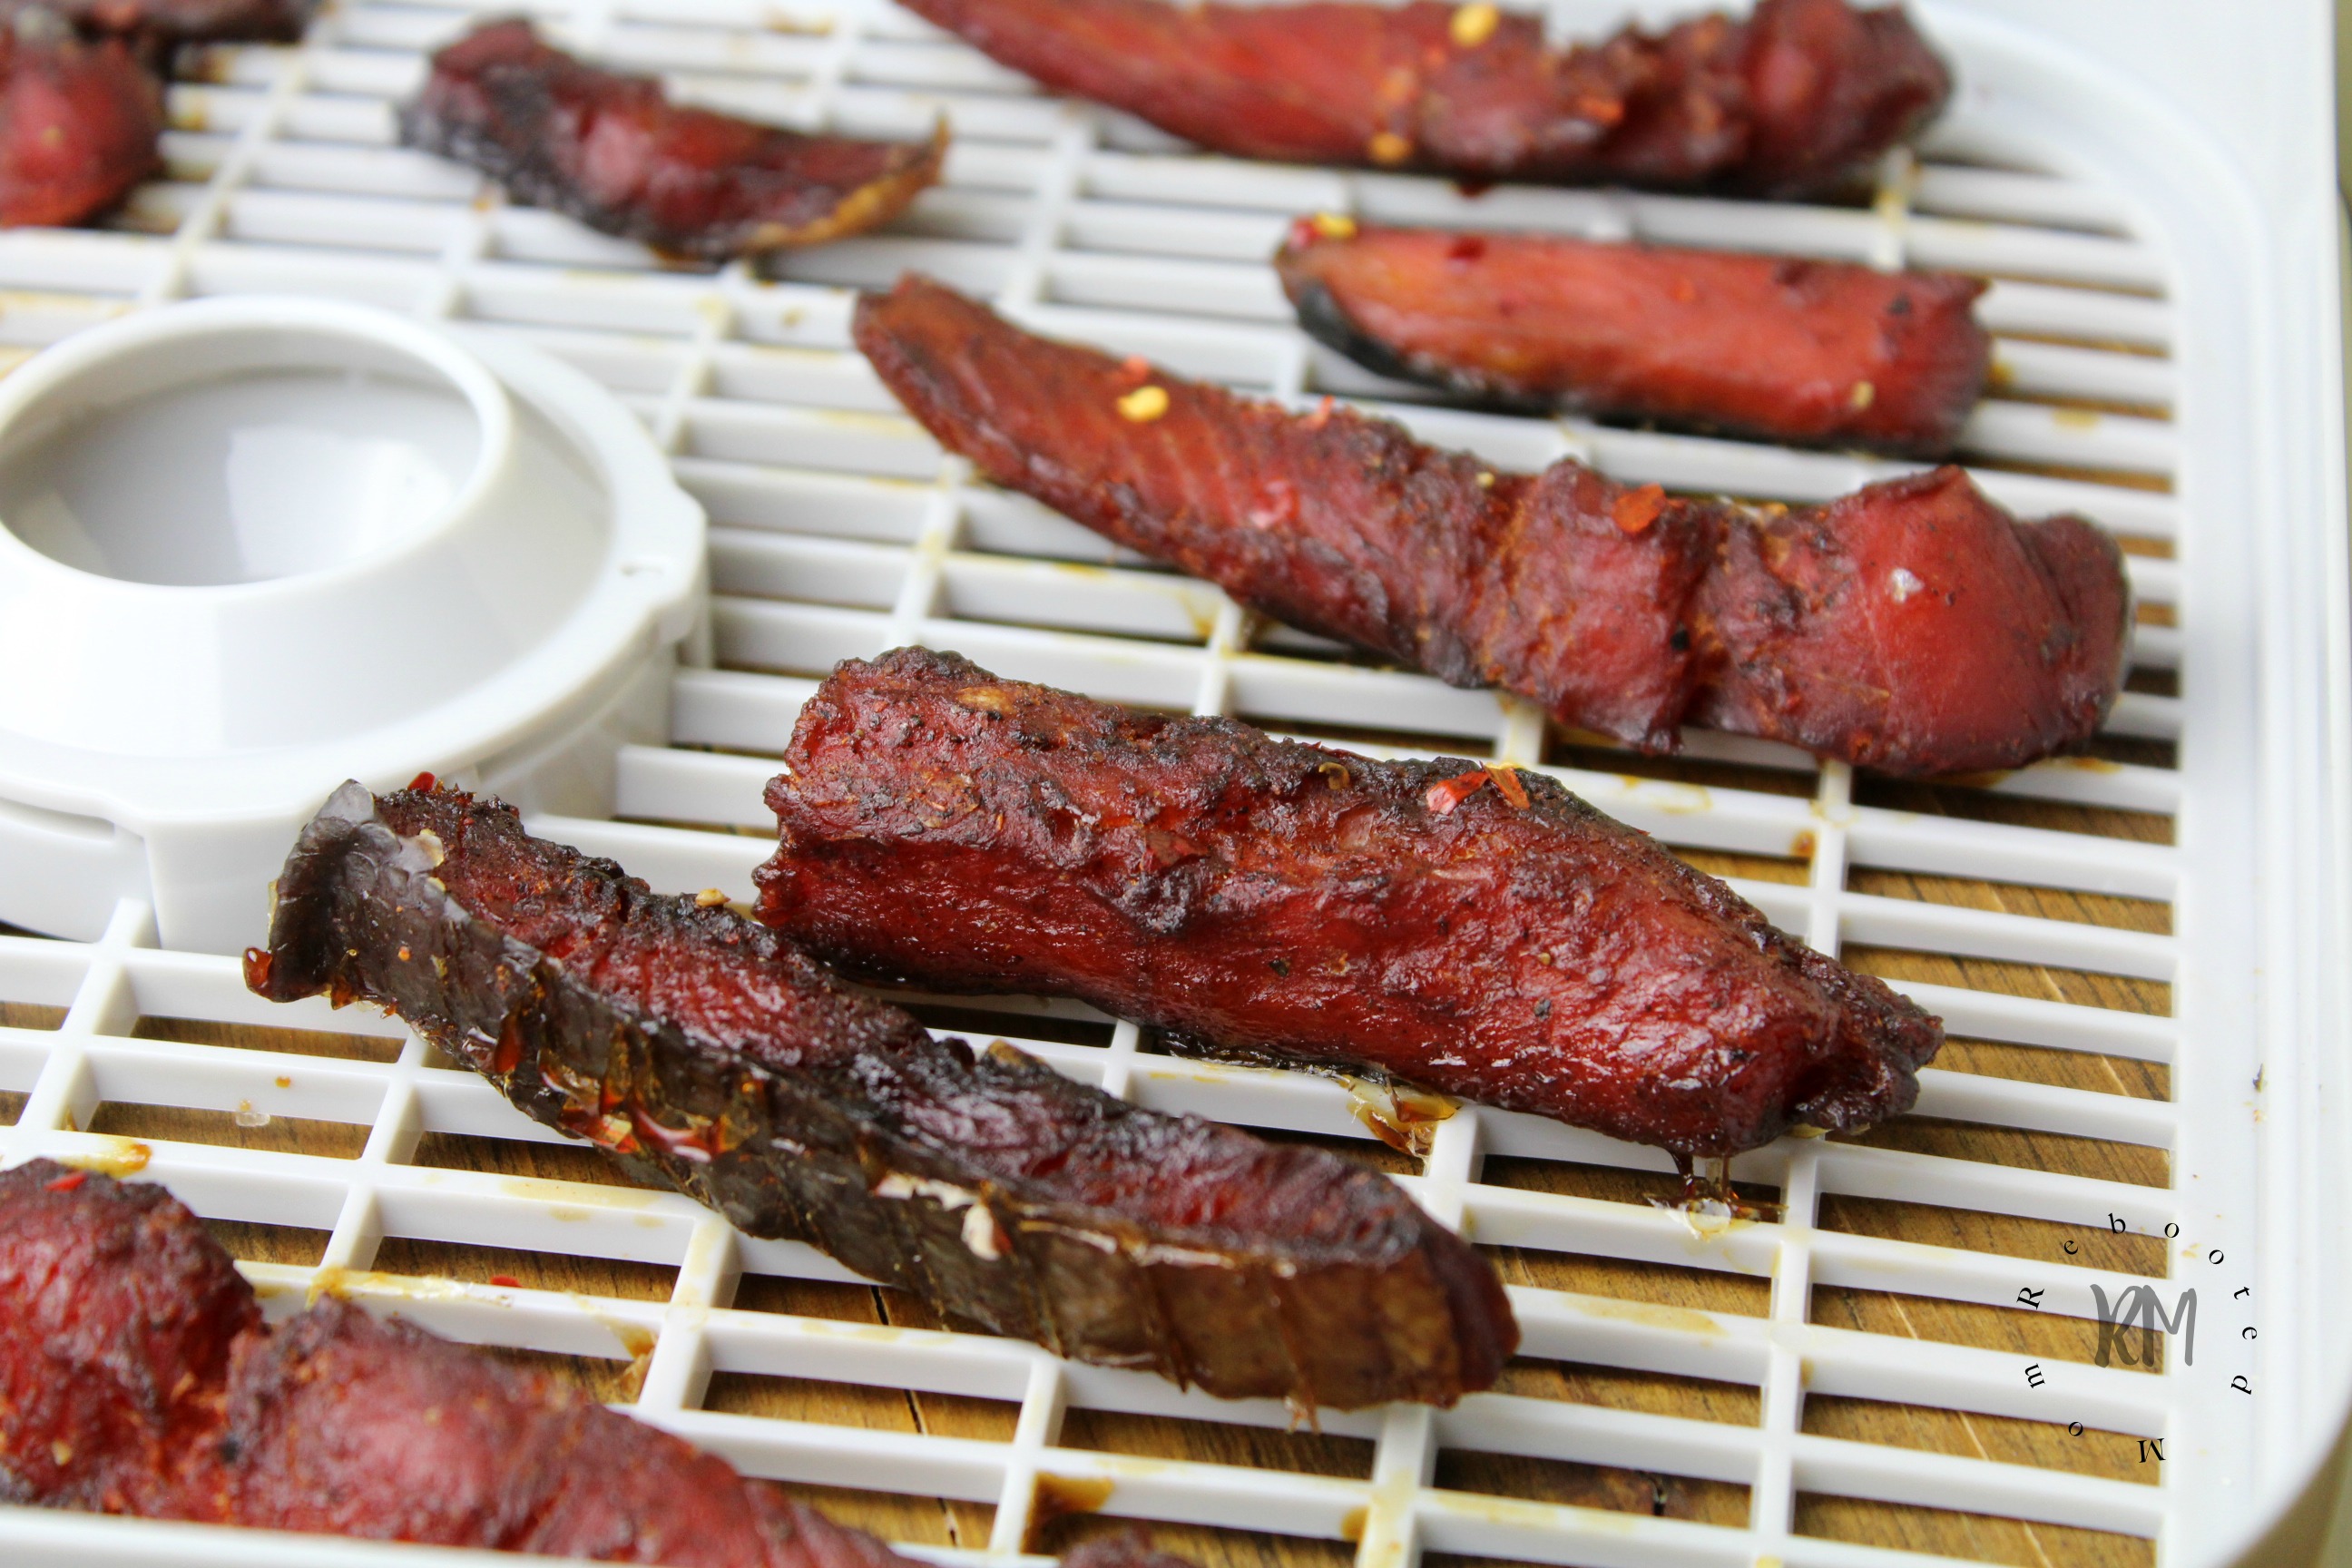 Made with simple ingredients, this salmon jerky will hit the spot as a satisfying snack with flavor that's both sweet and smoky.